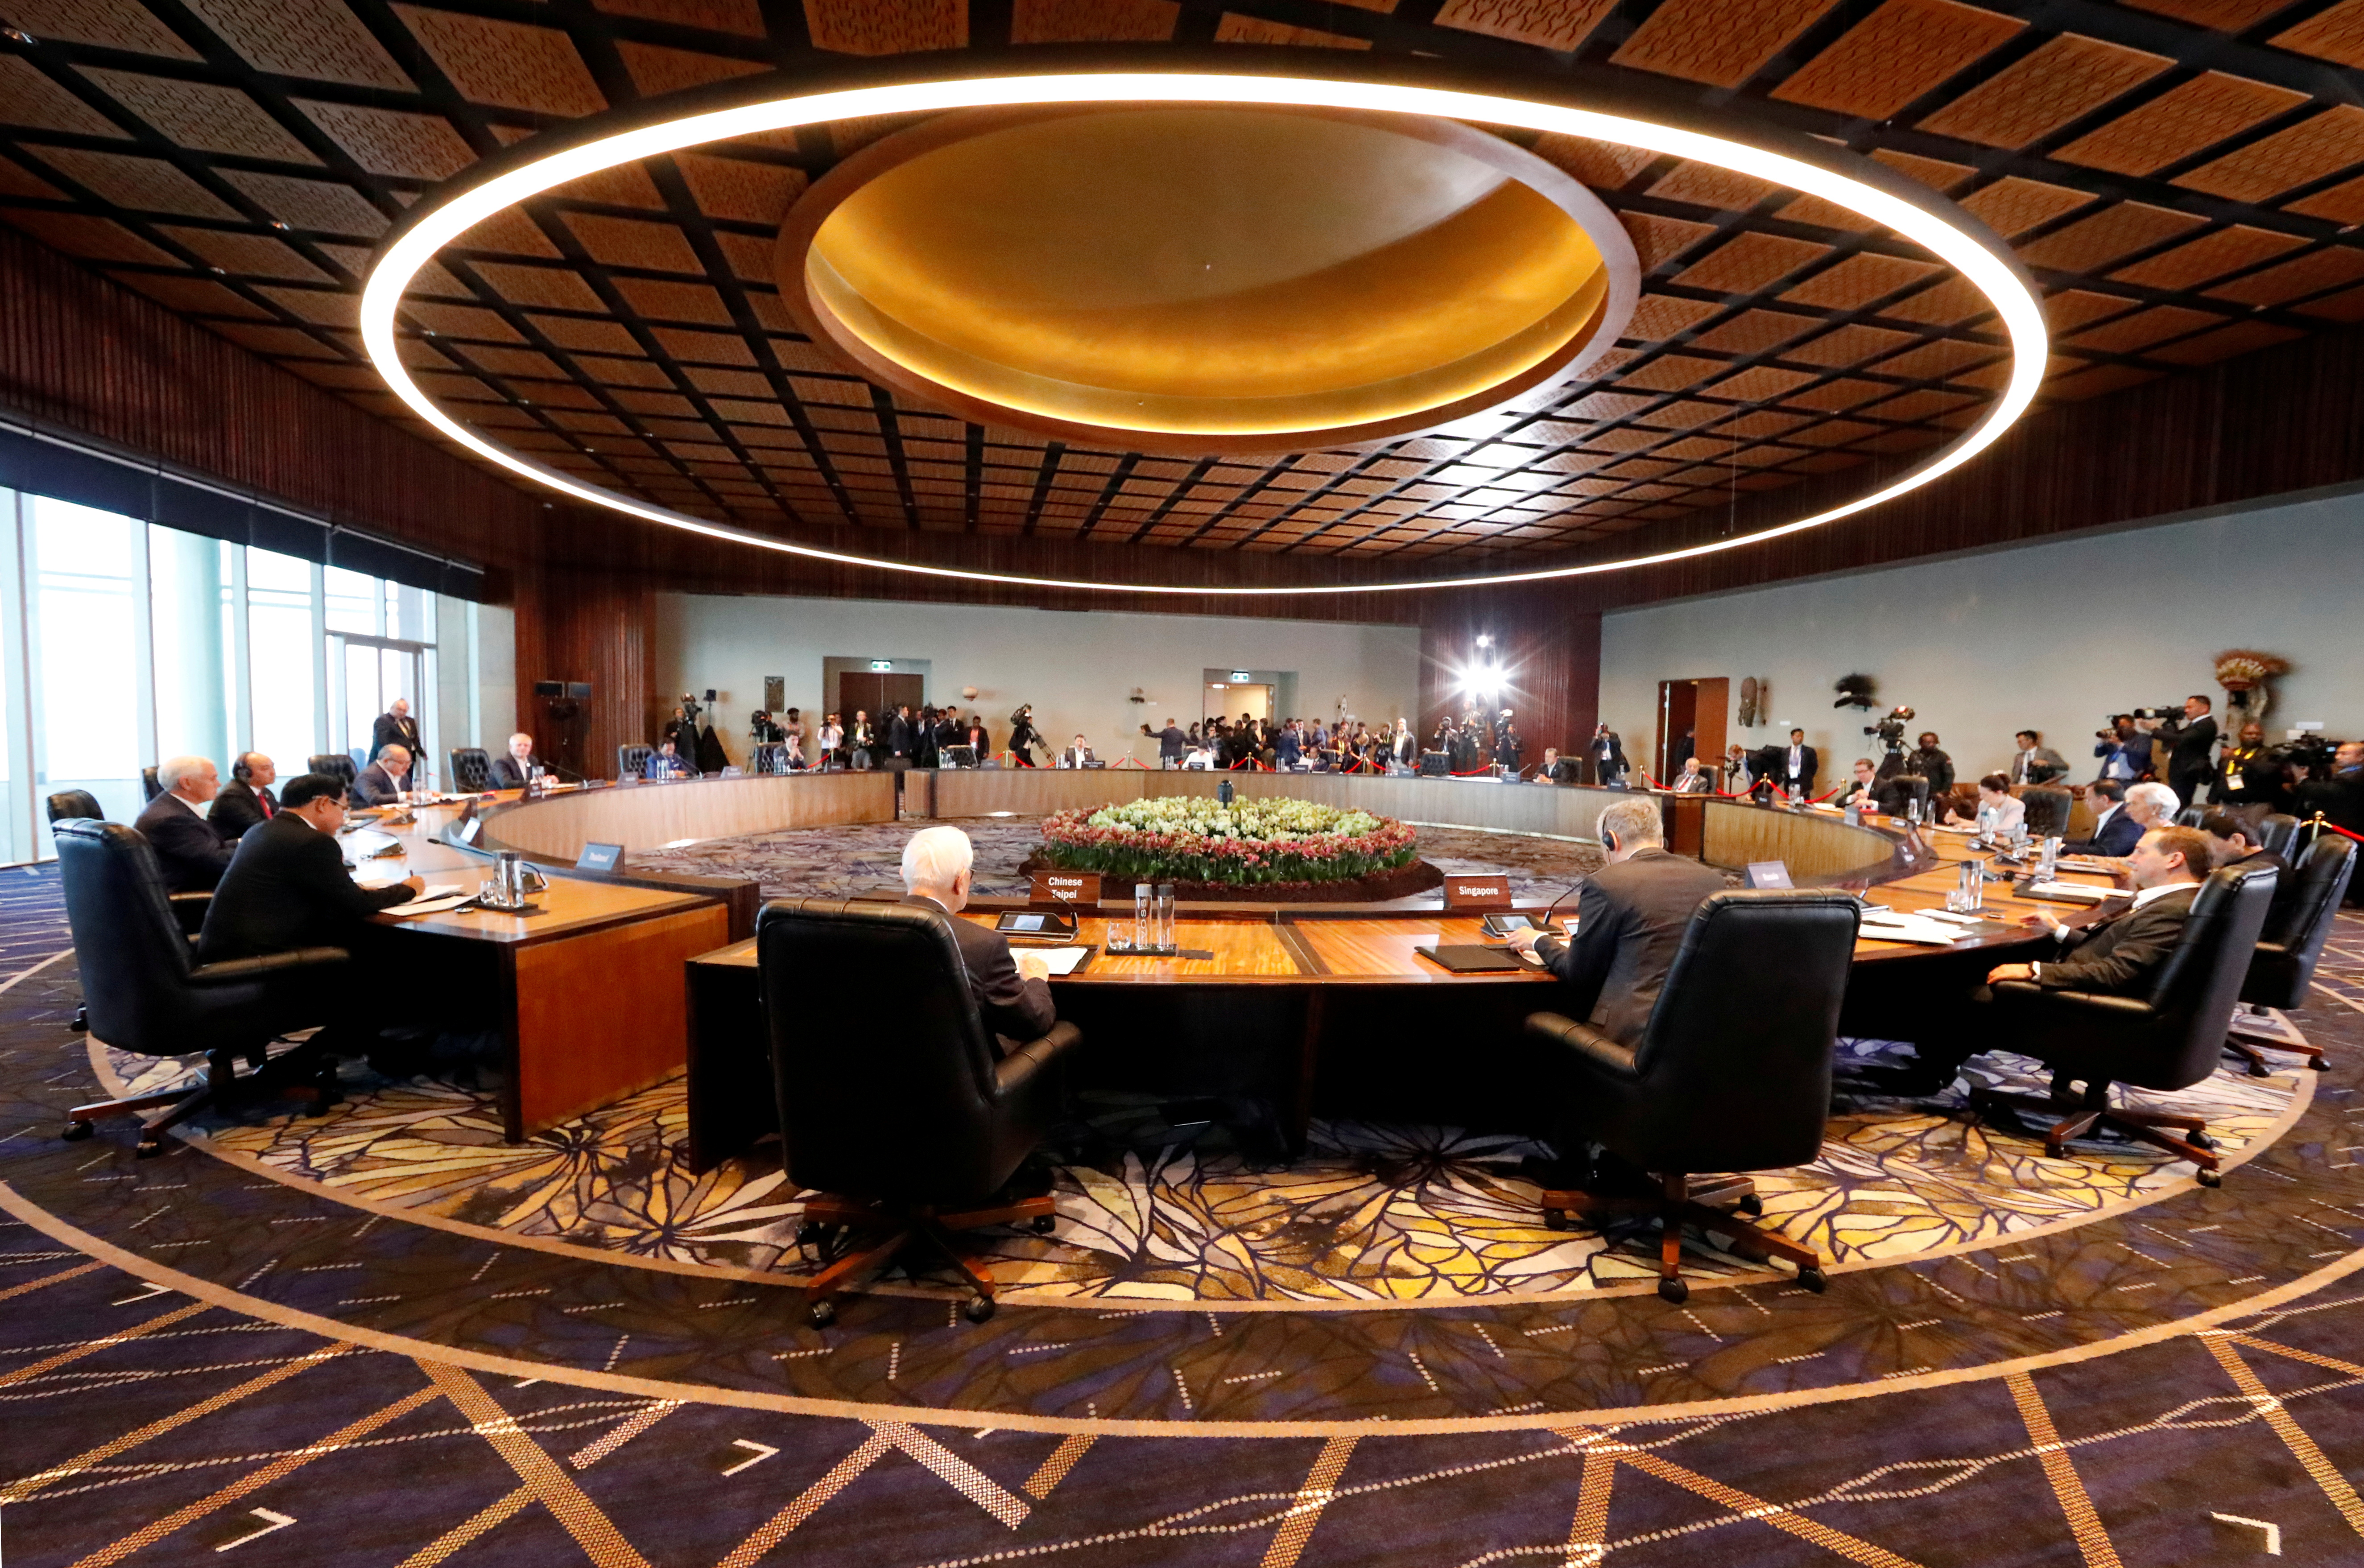 Leaders attend the retreat session of the APEC Summit in Port Moresby, Papua New Guinea